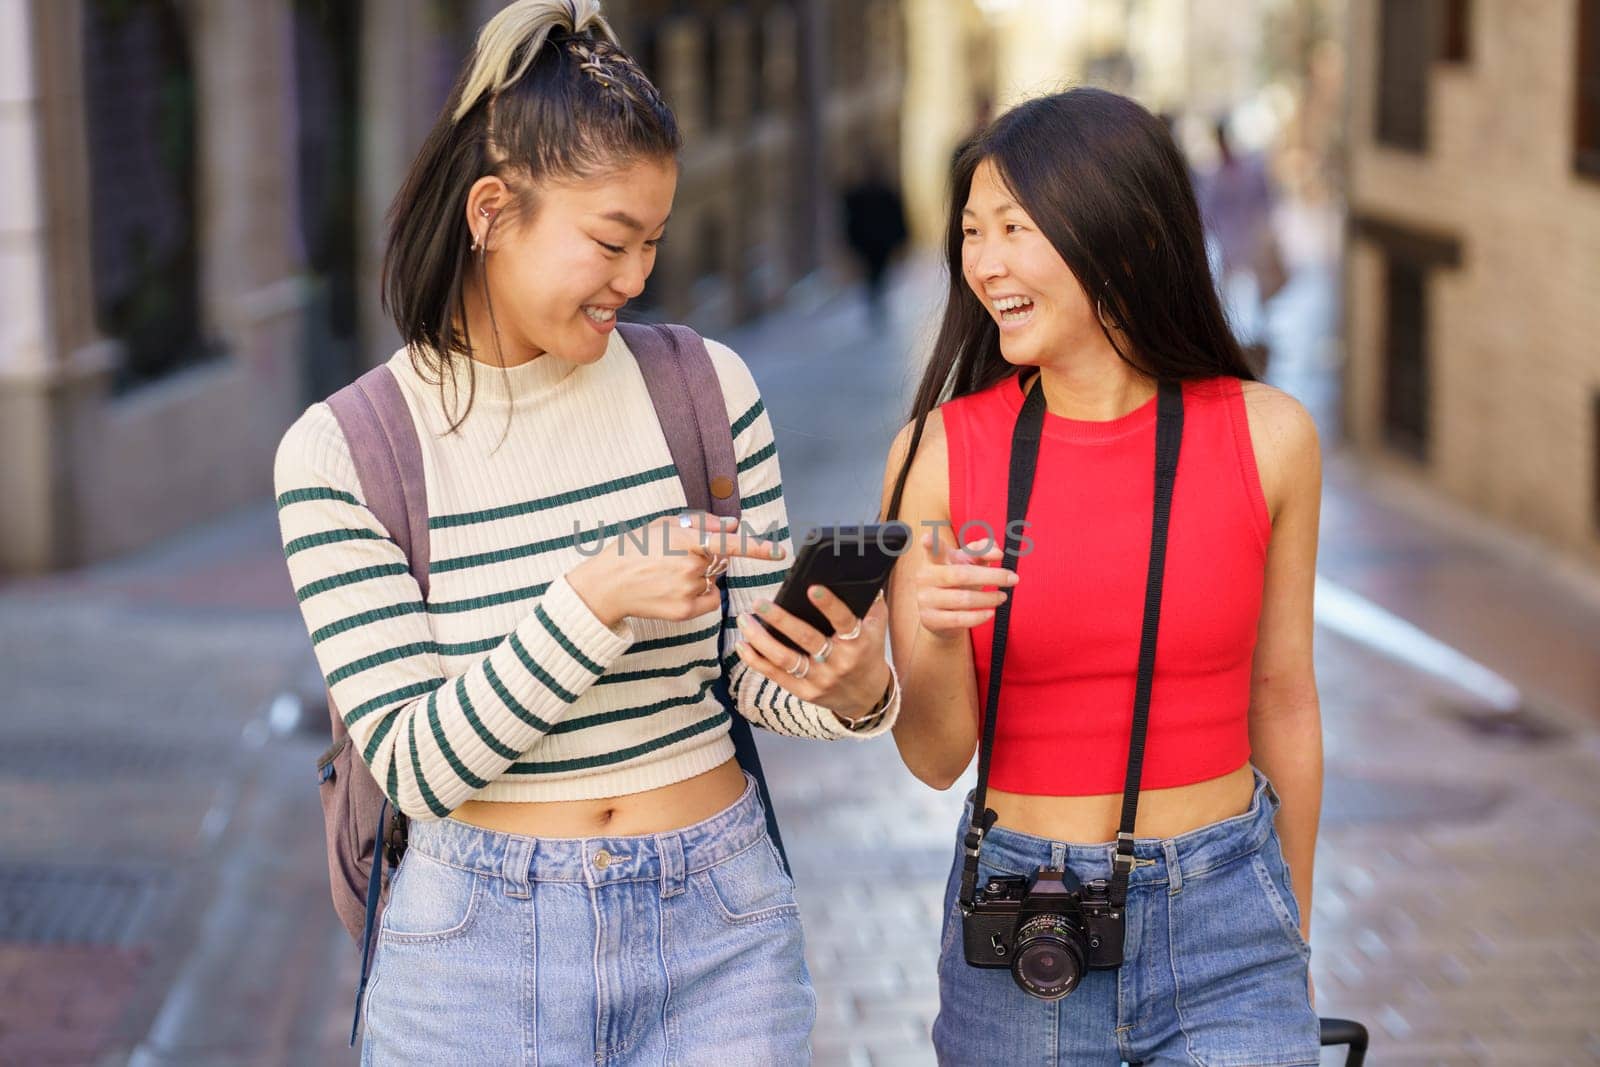 Positive young Asian women in casual clothes with backpack and photo camera, walking on town street while pointing at smartphone screen and laughing during trip through Spain